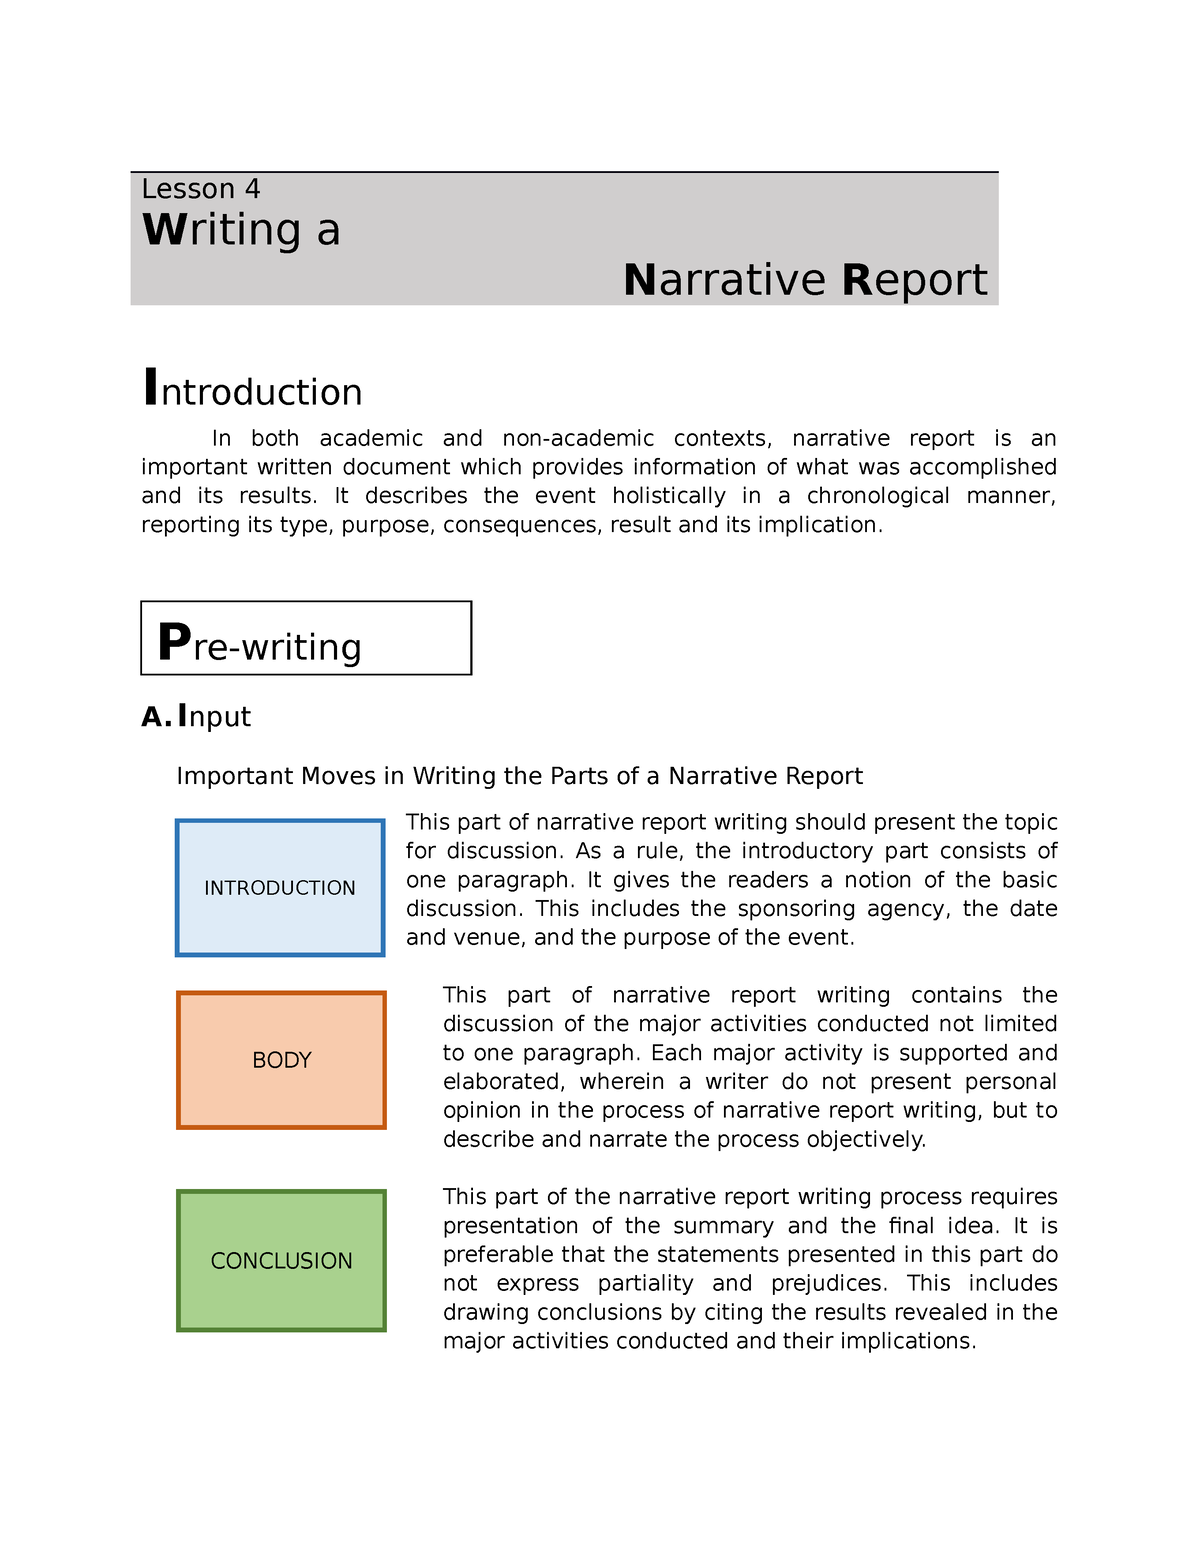 introduction for a narrative report